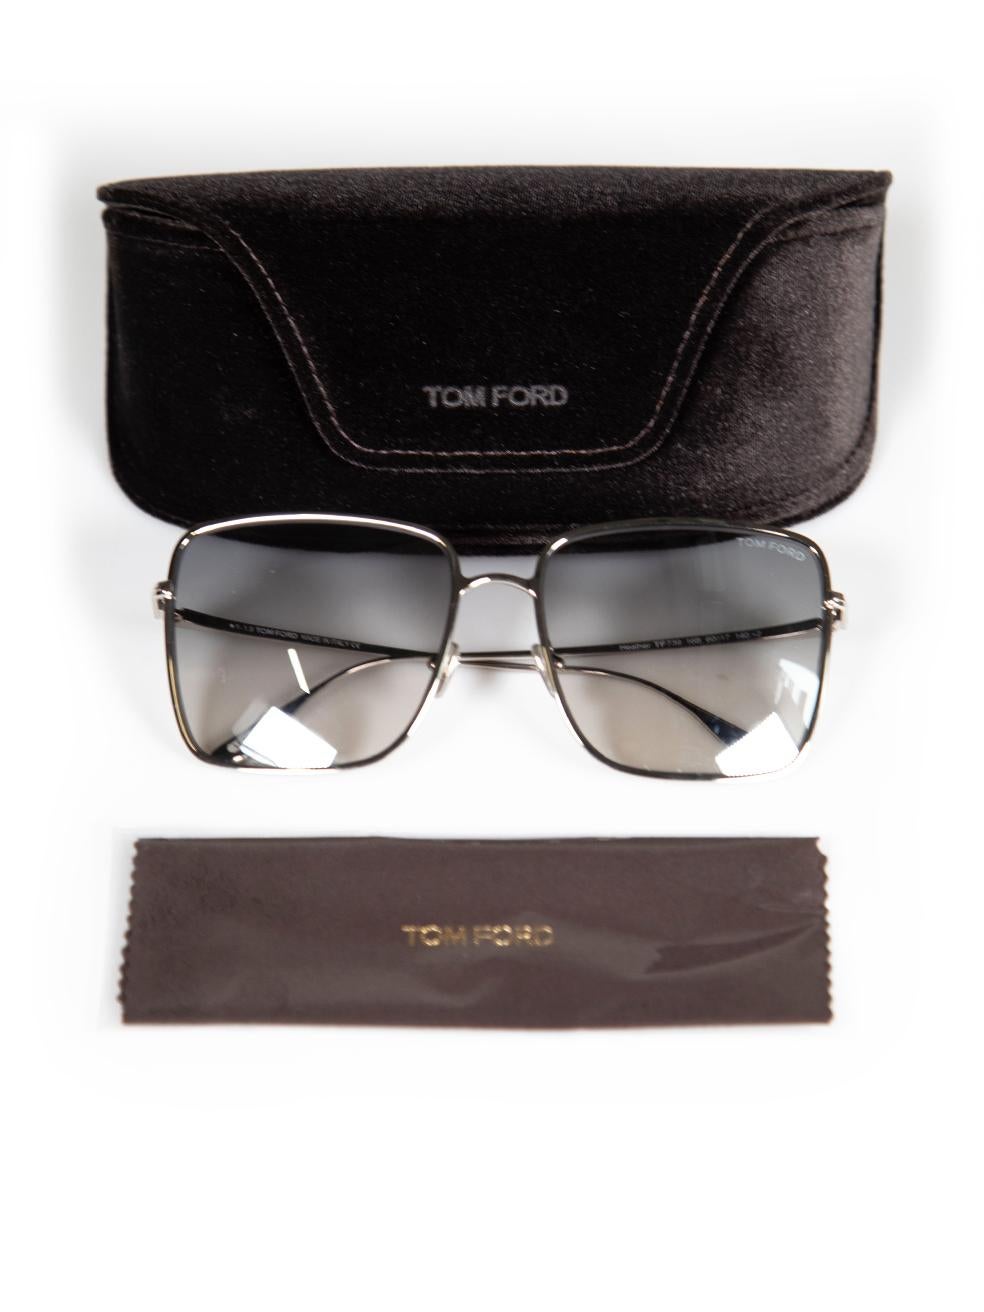 Tom Ford Heather Grey Smoke Square Sunglasses For Sale 4